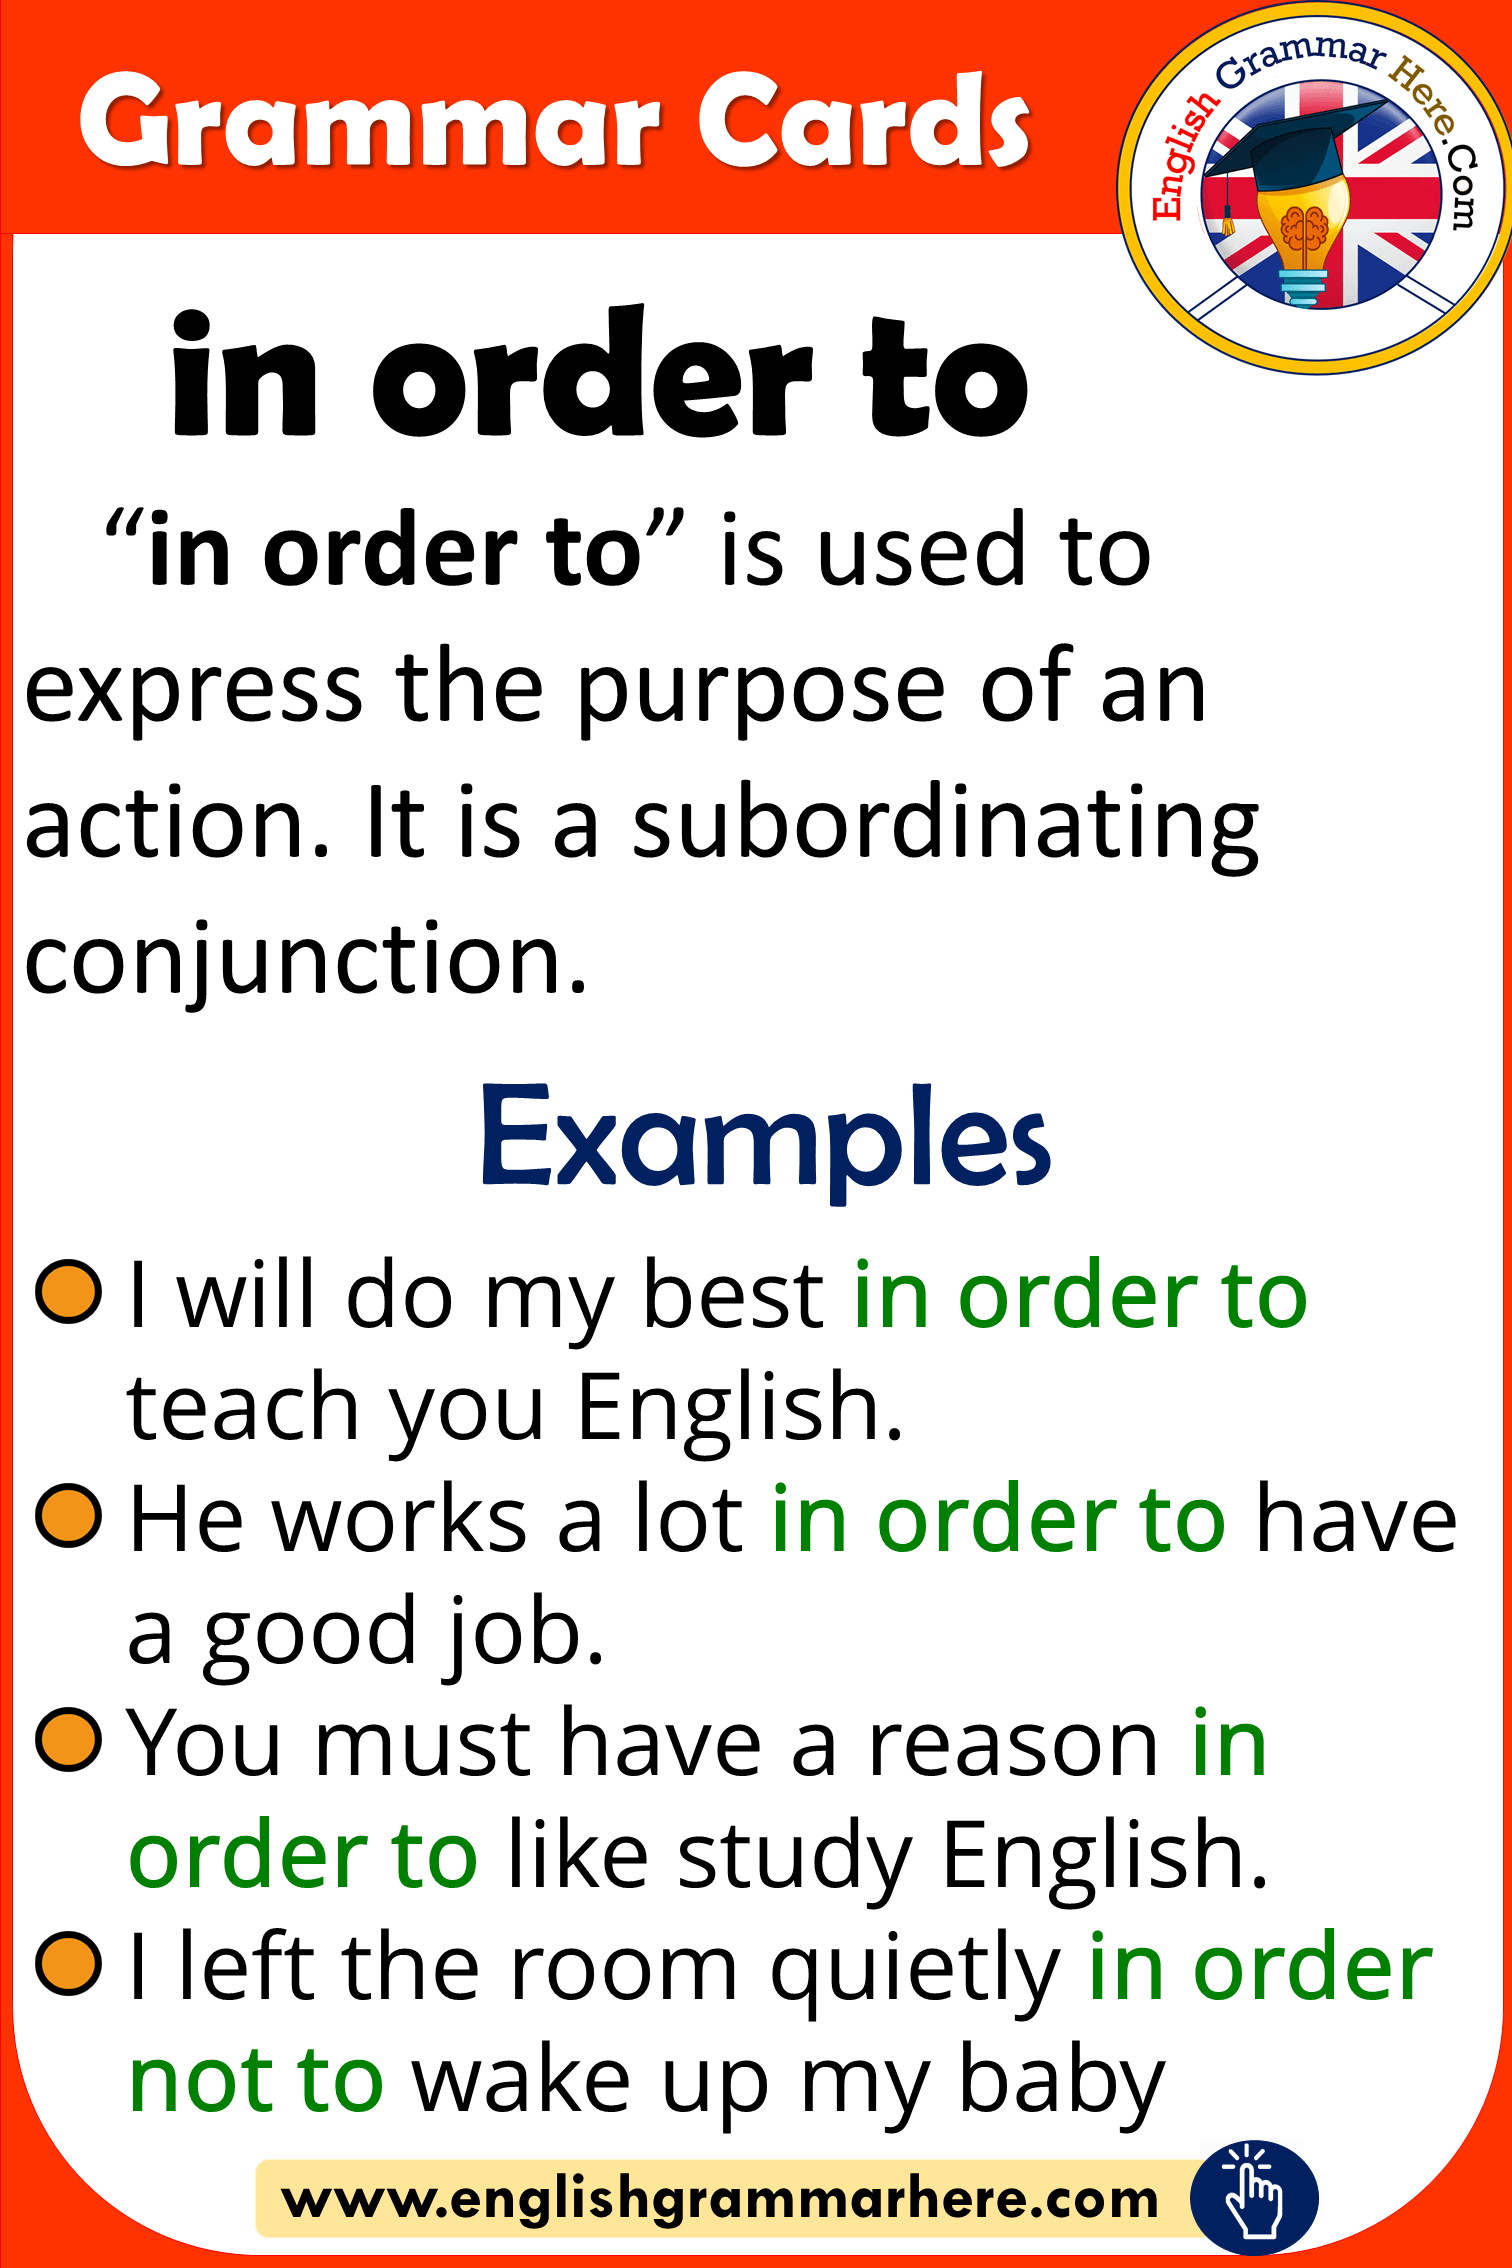 Grammar Cards – Using In Order To in English